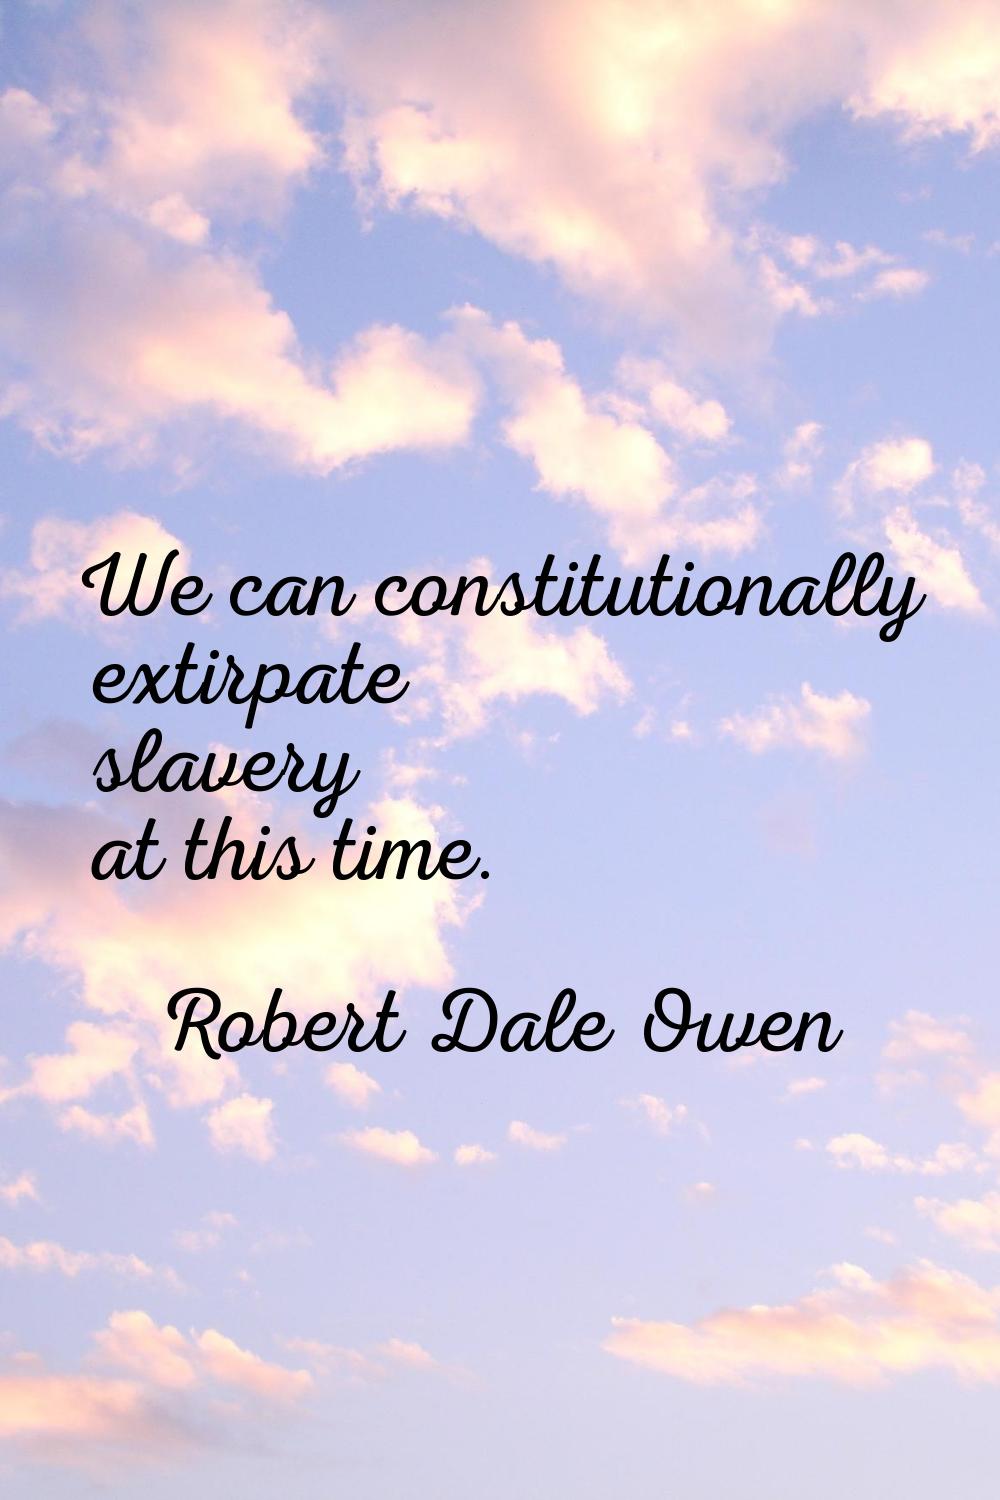 We can constitutionally extirpate slavery at this time.